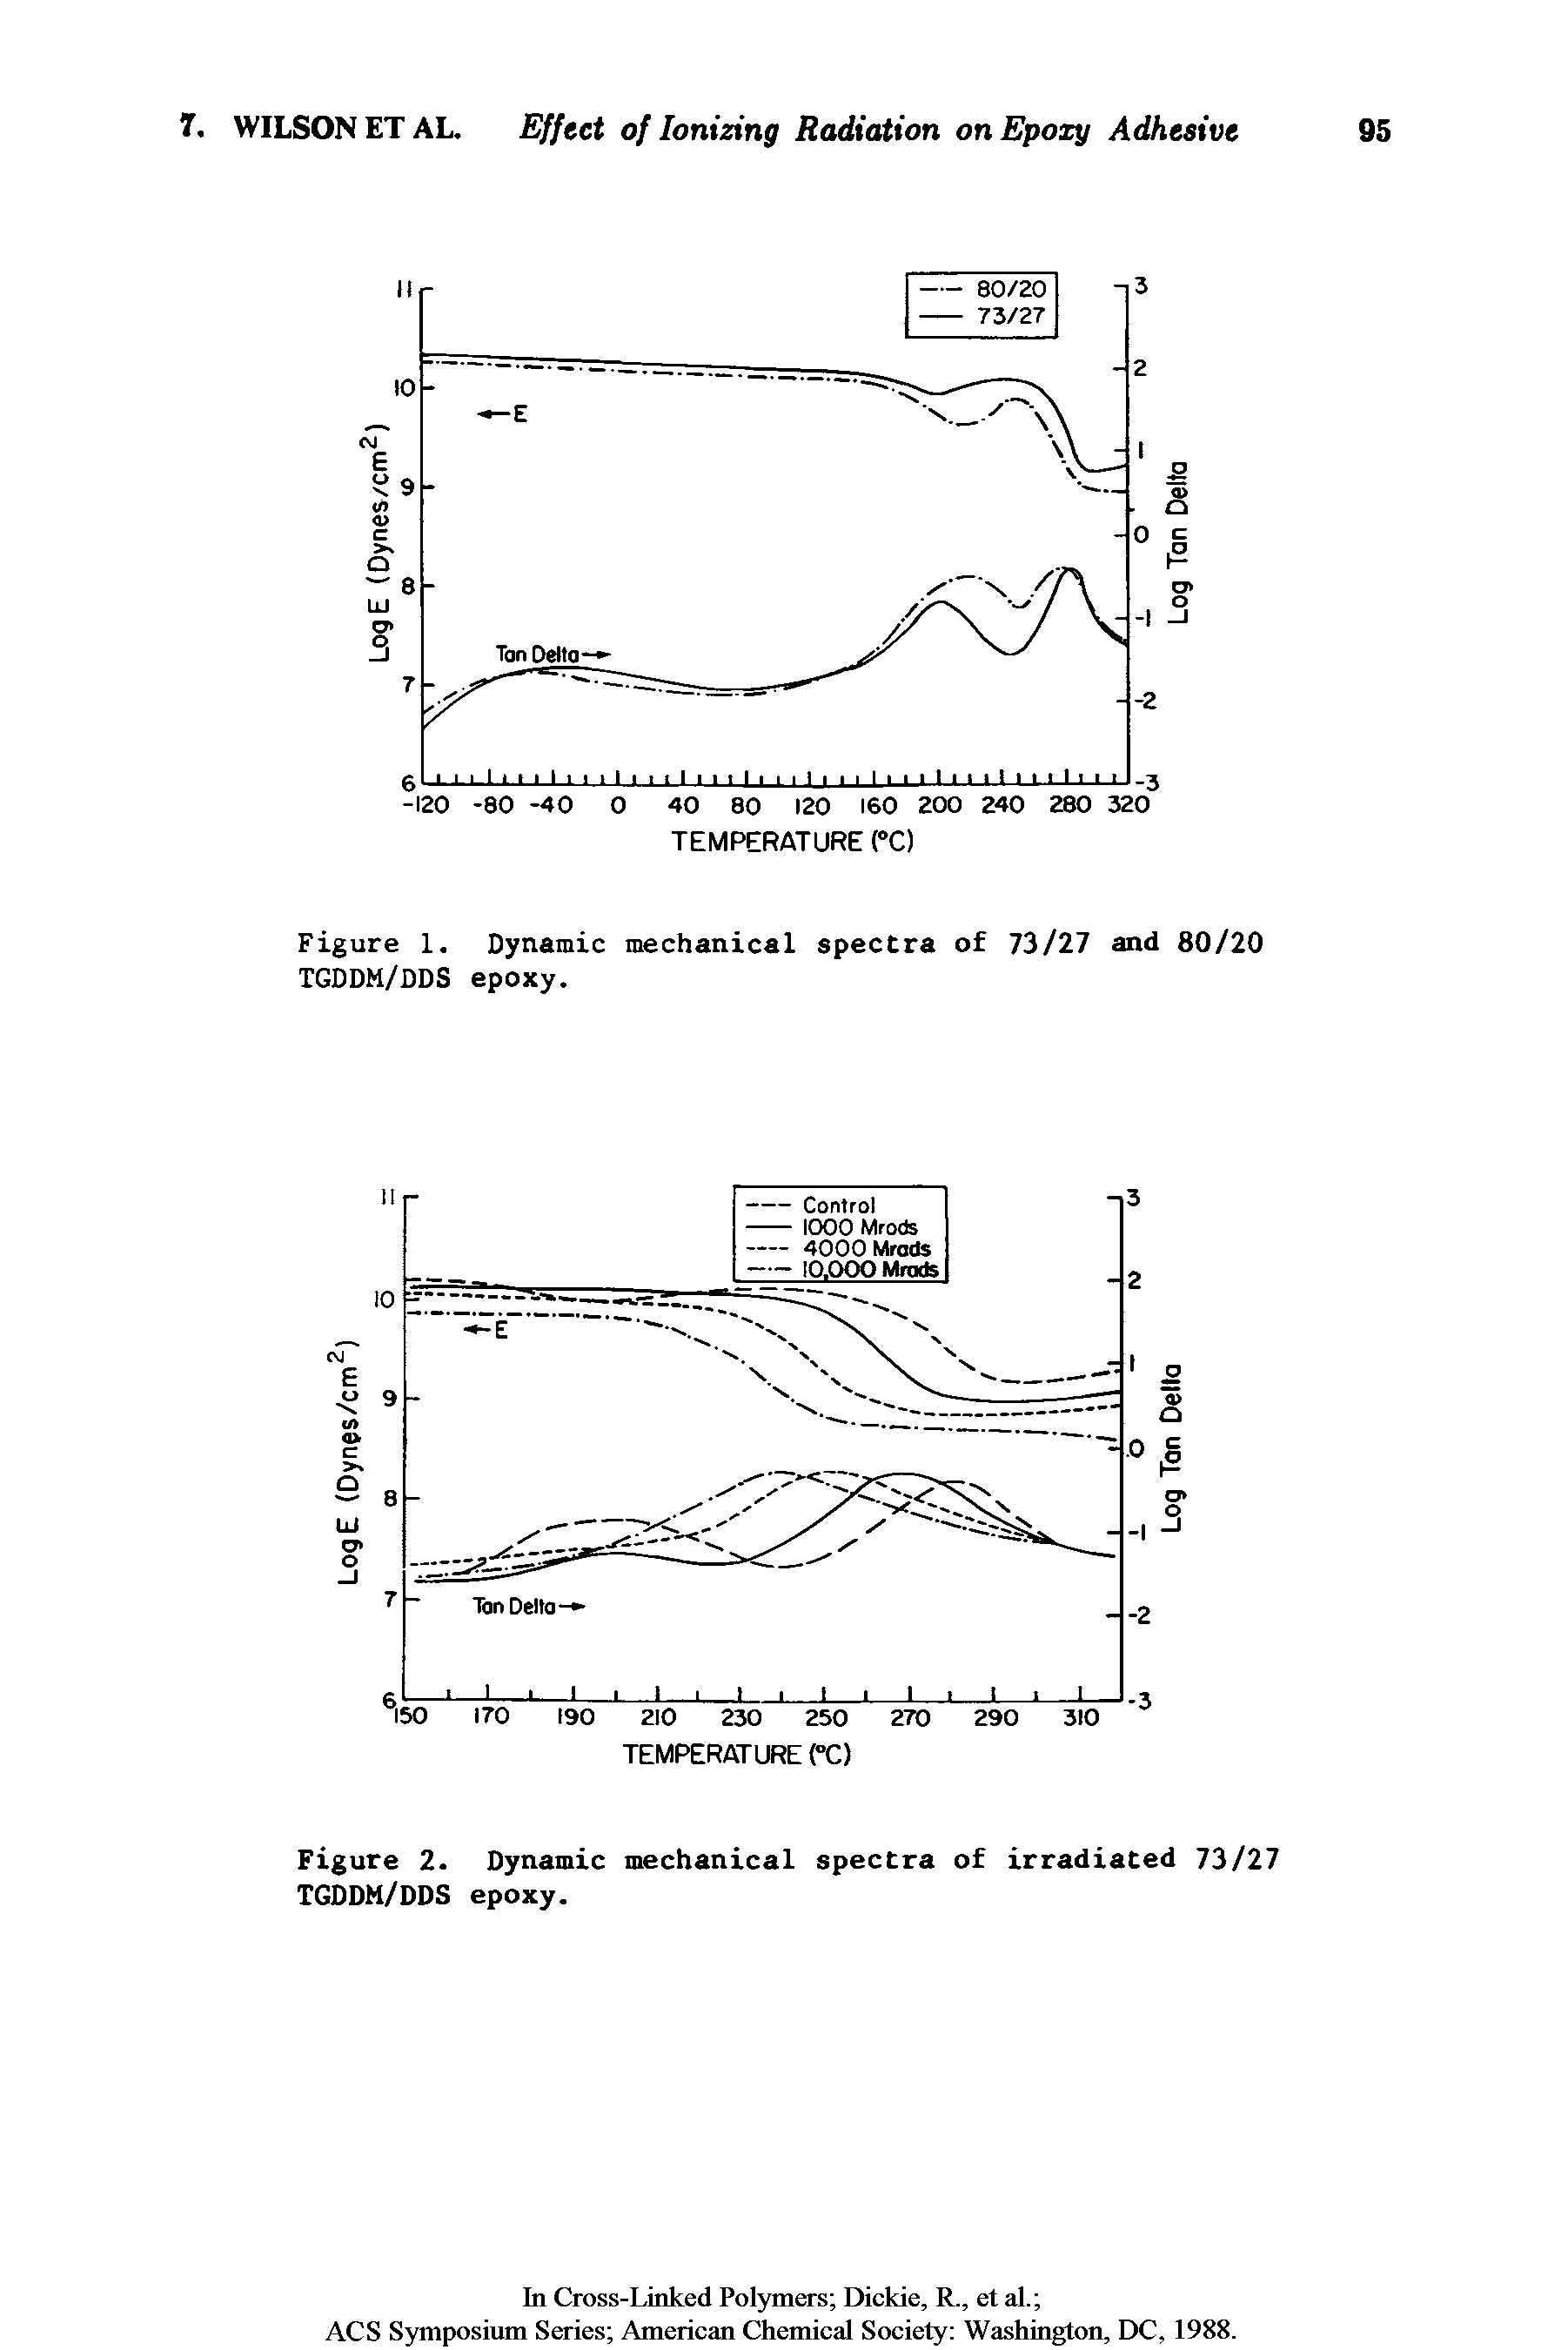 Figure 1. Dynamic mechanical spectra of 73127 and 80/20 TGDDM/DDS epoxy.